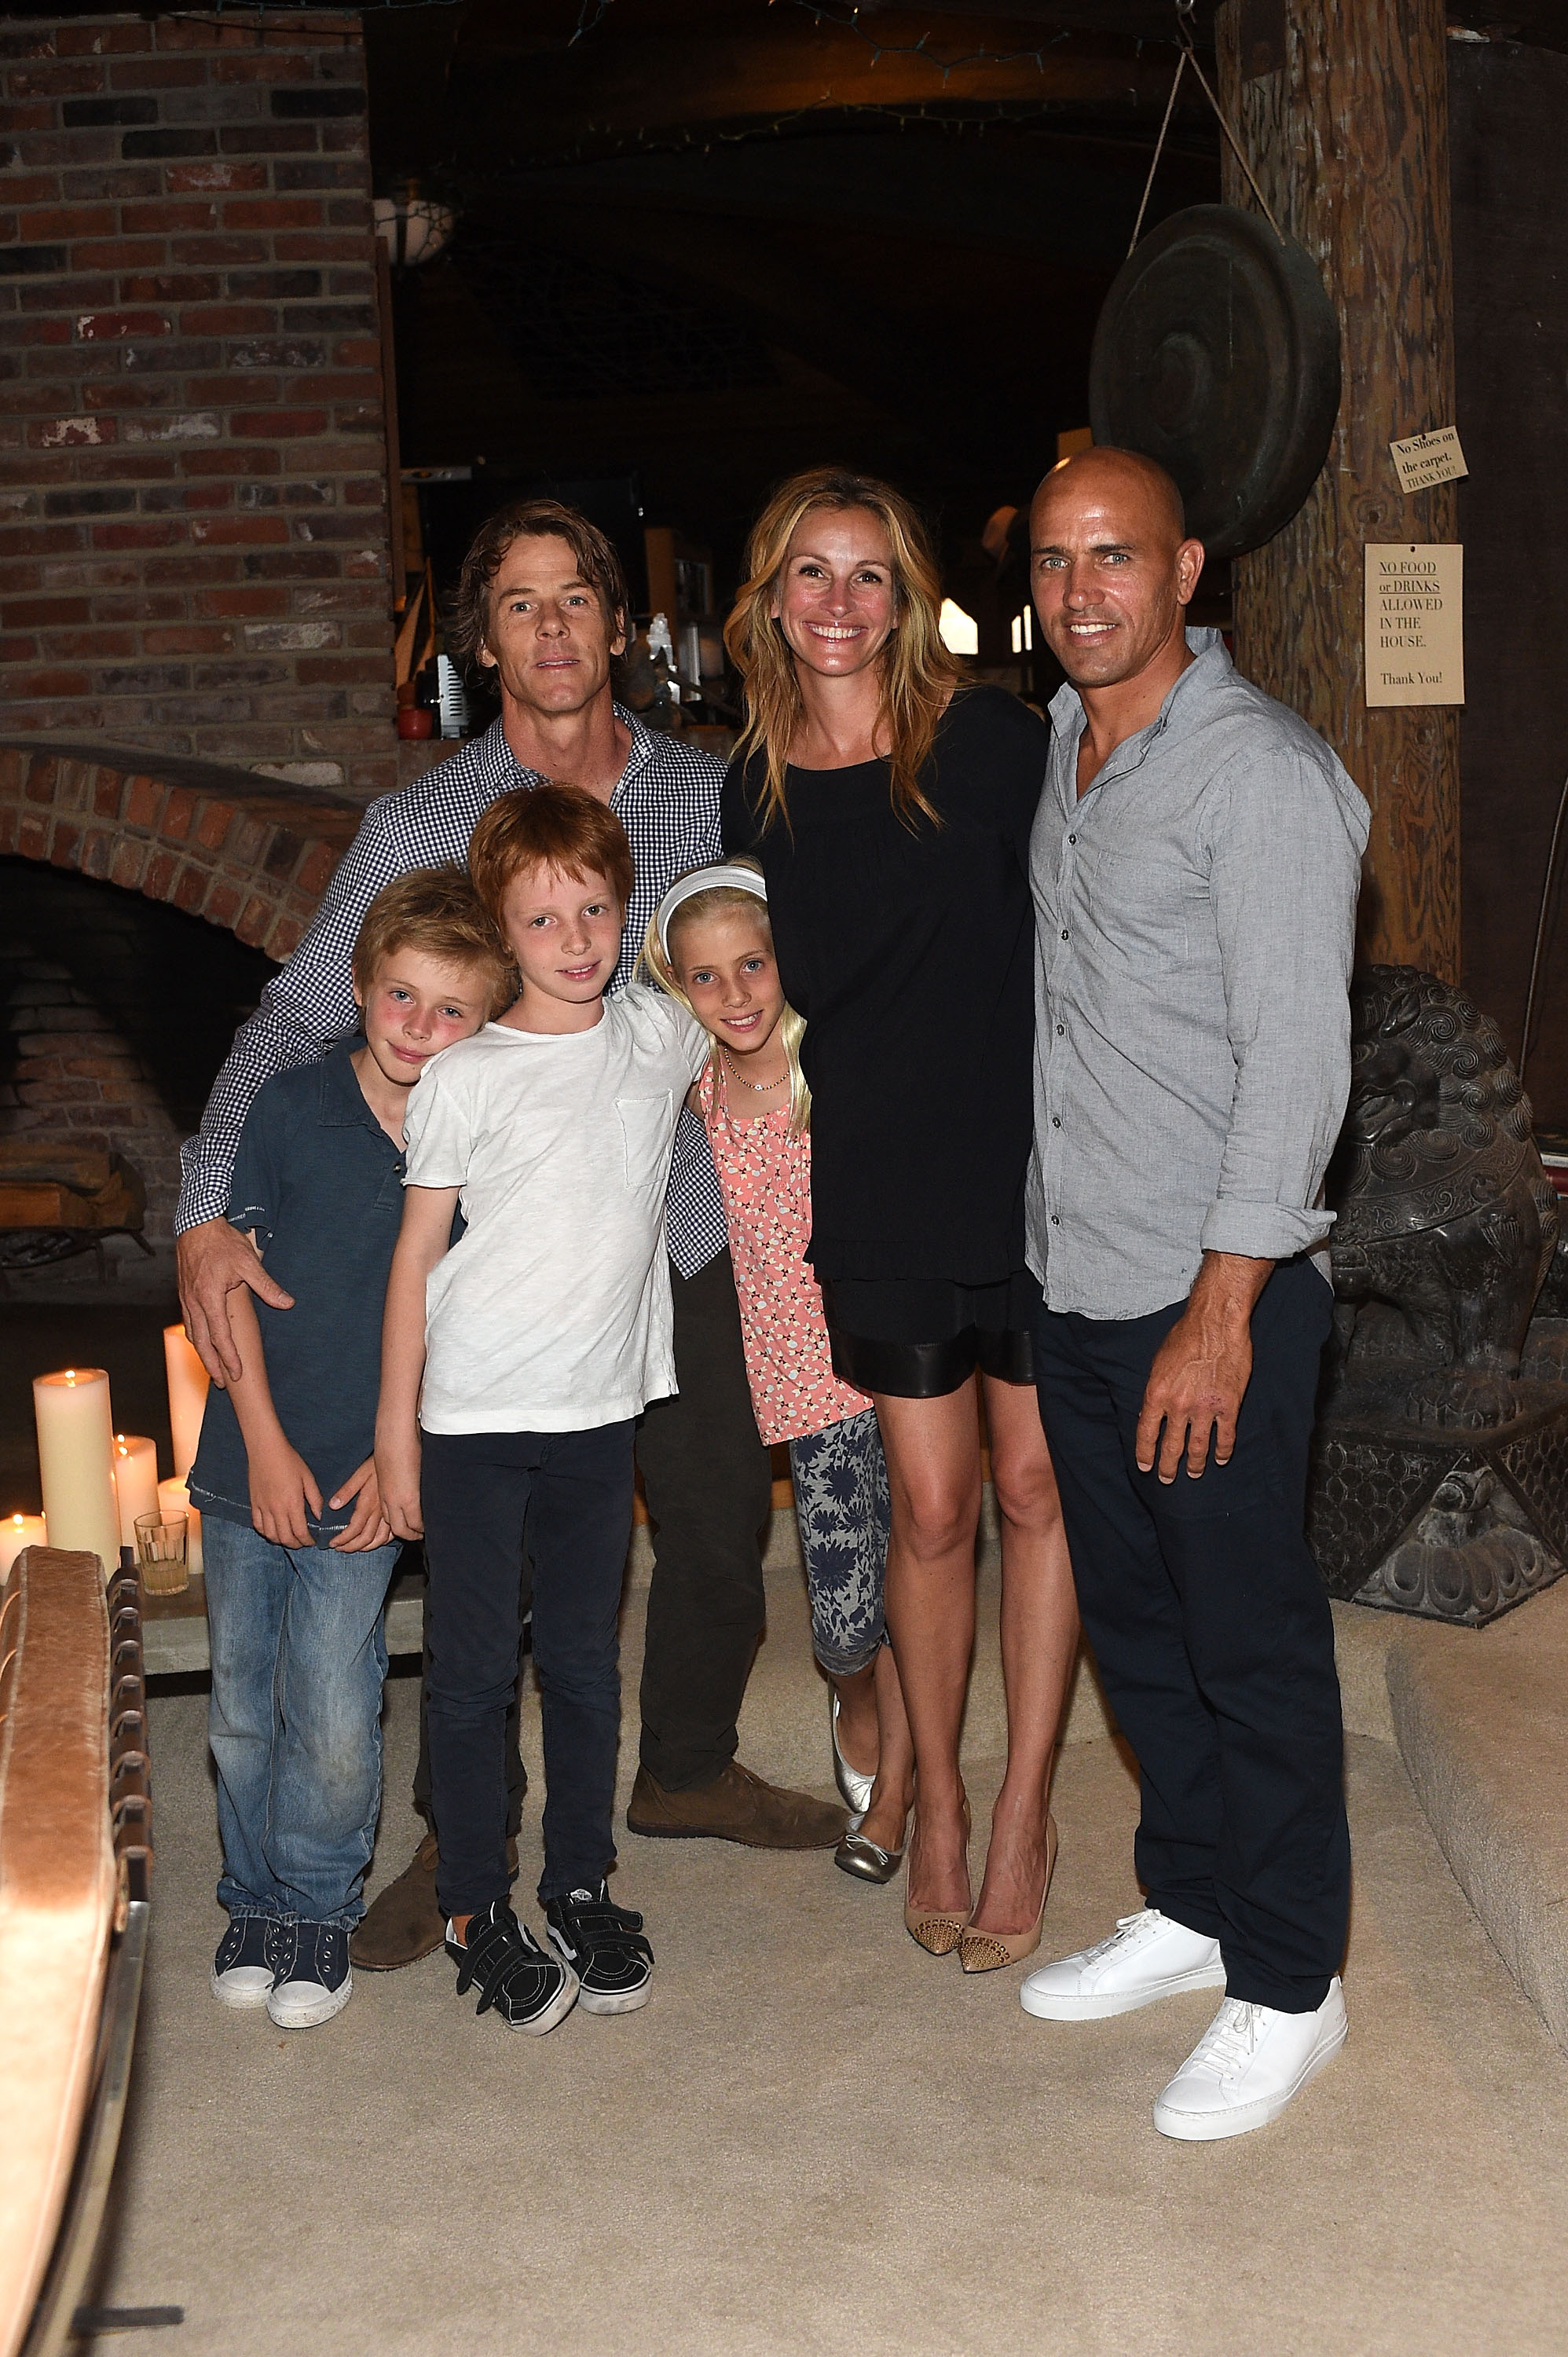 Danny Moder, Julia Roberts, Kelly Slater, Phinnaeus Moder, Henry Moder and Hazel Moder at the Kelly Slater, John Moore and Friends Celebrate the Launch of Outerknown event in Malibu, California on August 29, 2015 | Source: Getty Images